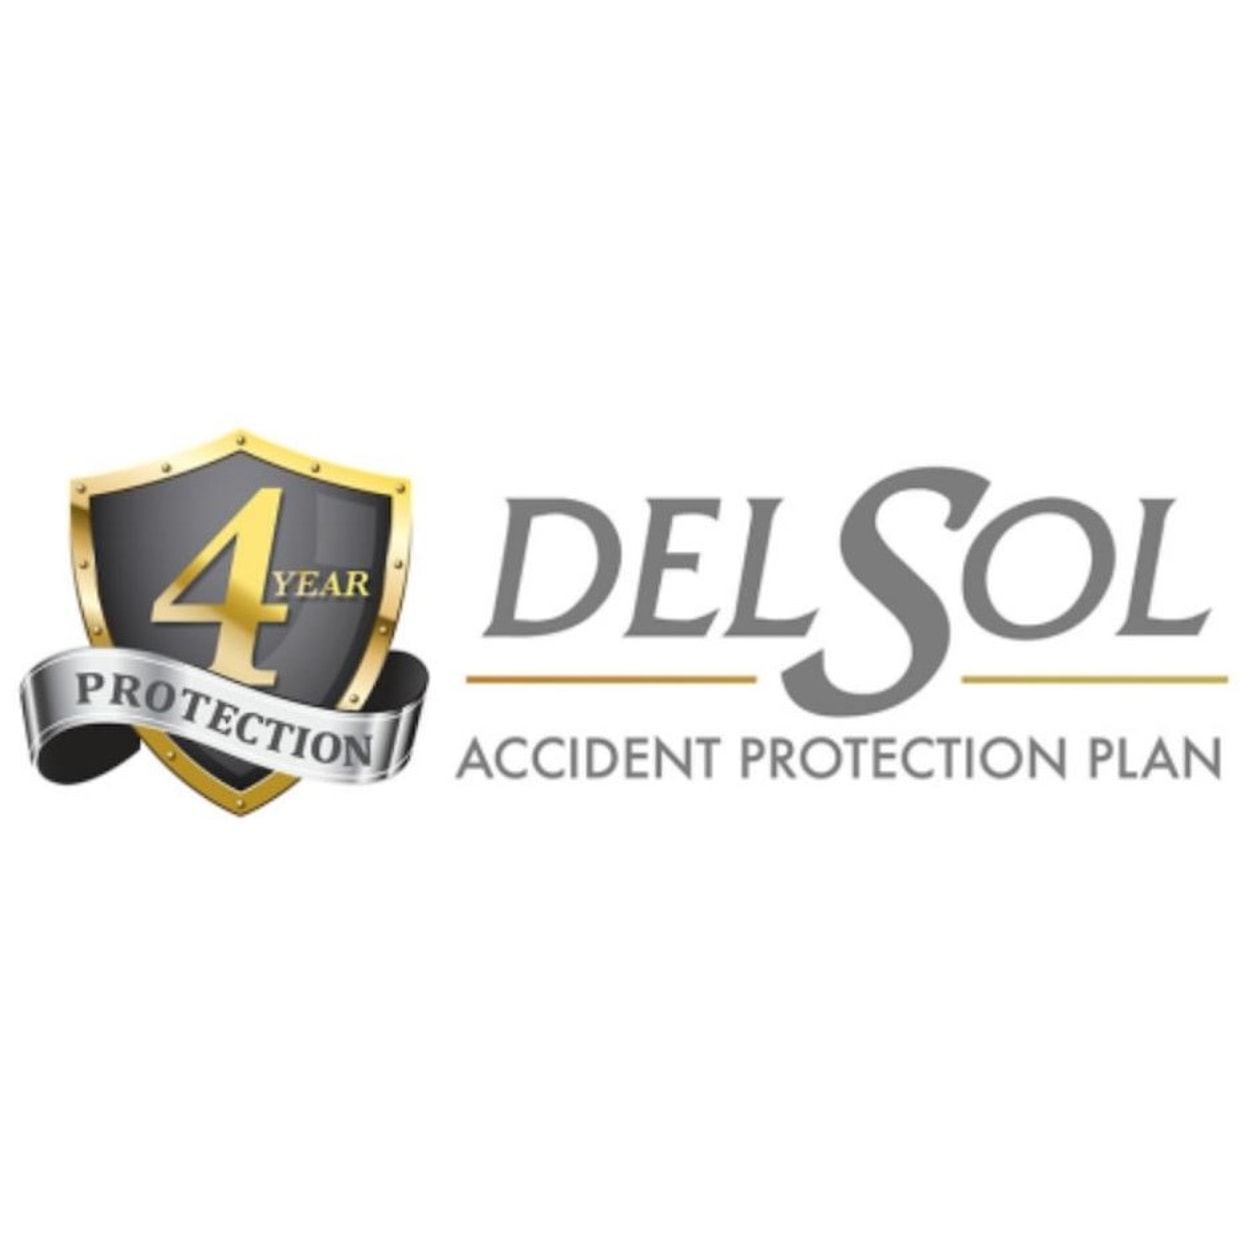 DS Del Sol Protection Plan 4YR PP -  $1,751 to $2,000